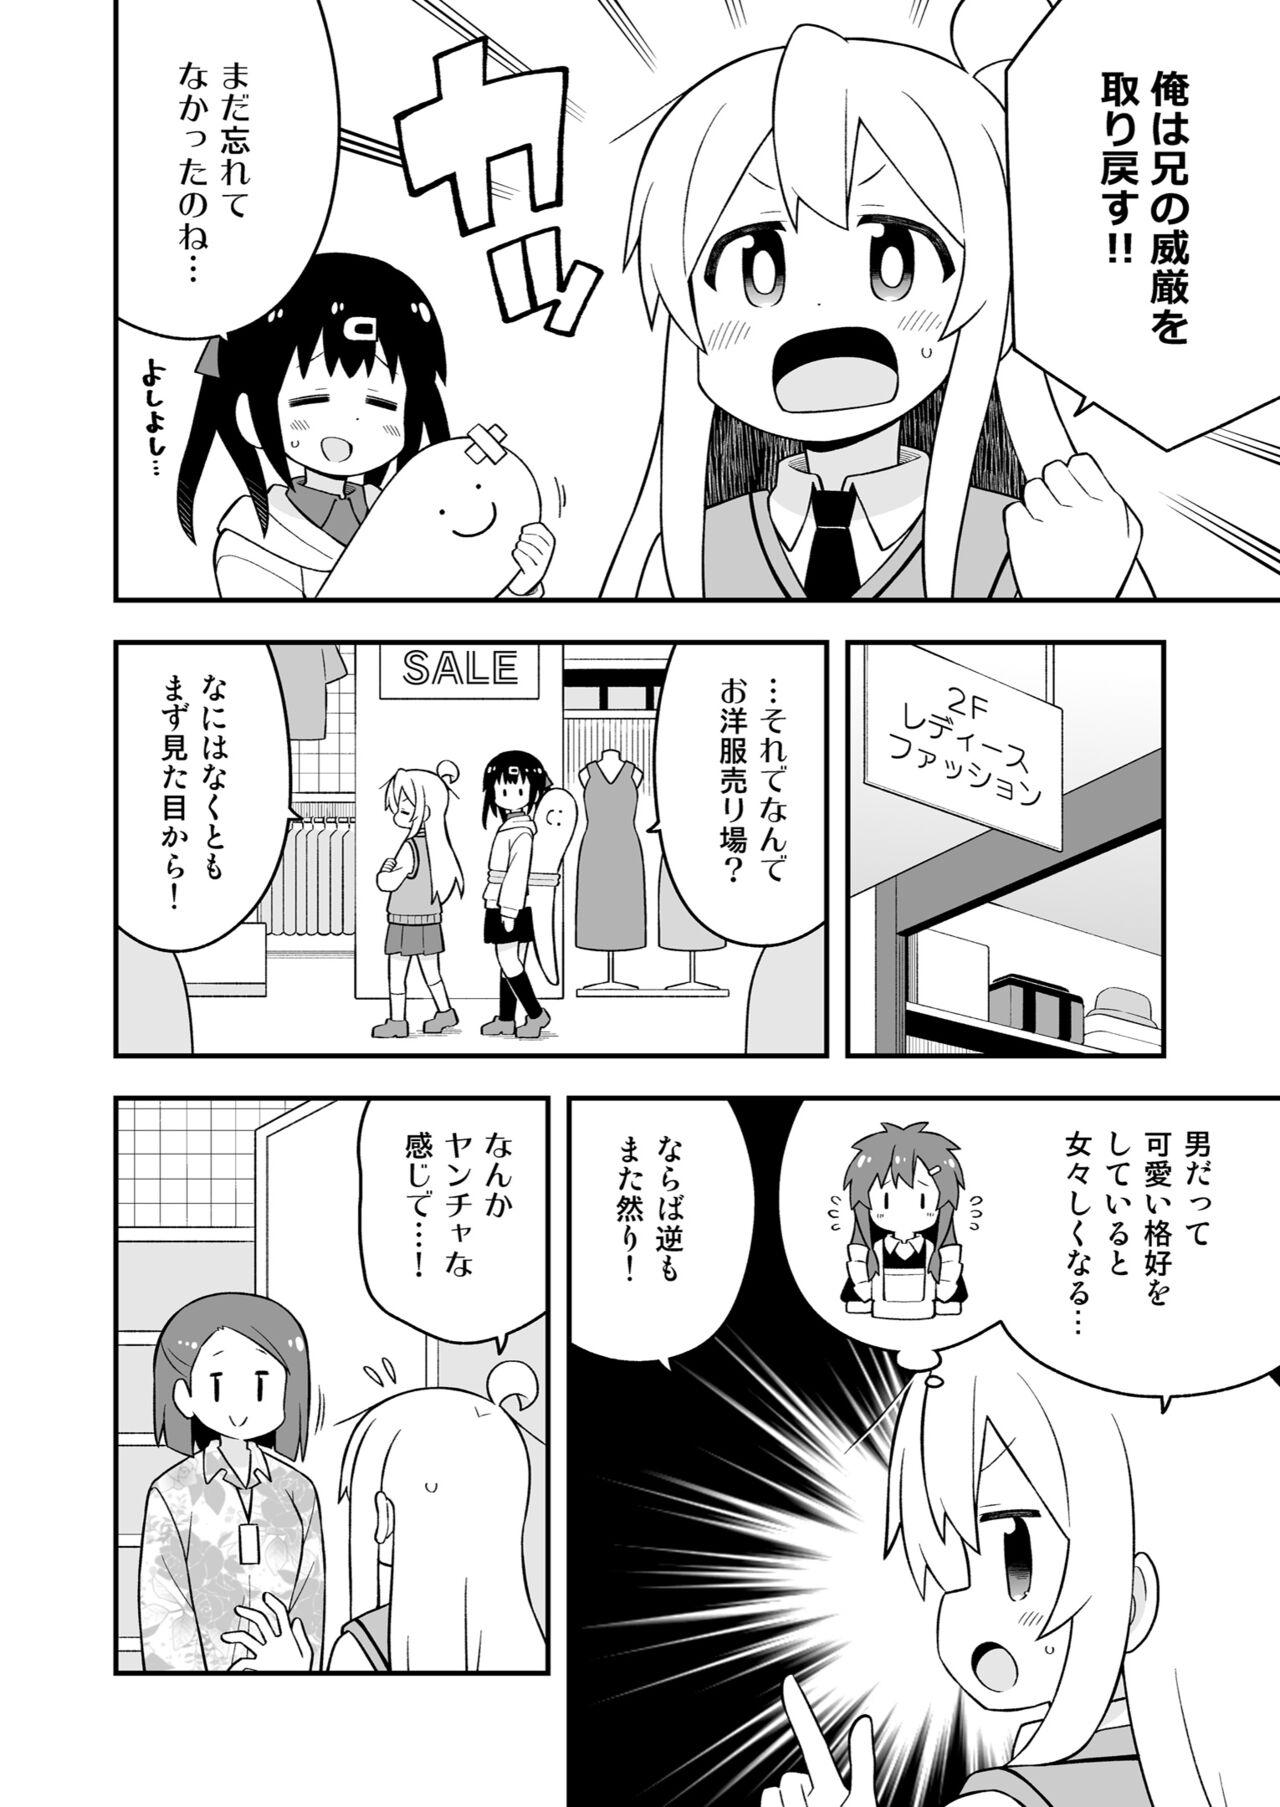 Long Onii-chan wa Oshimai! 23 - Onii chan wa oshimai Naturaltits - Page 8